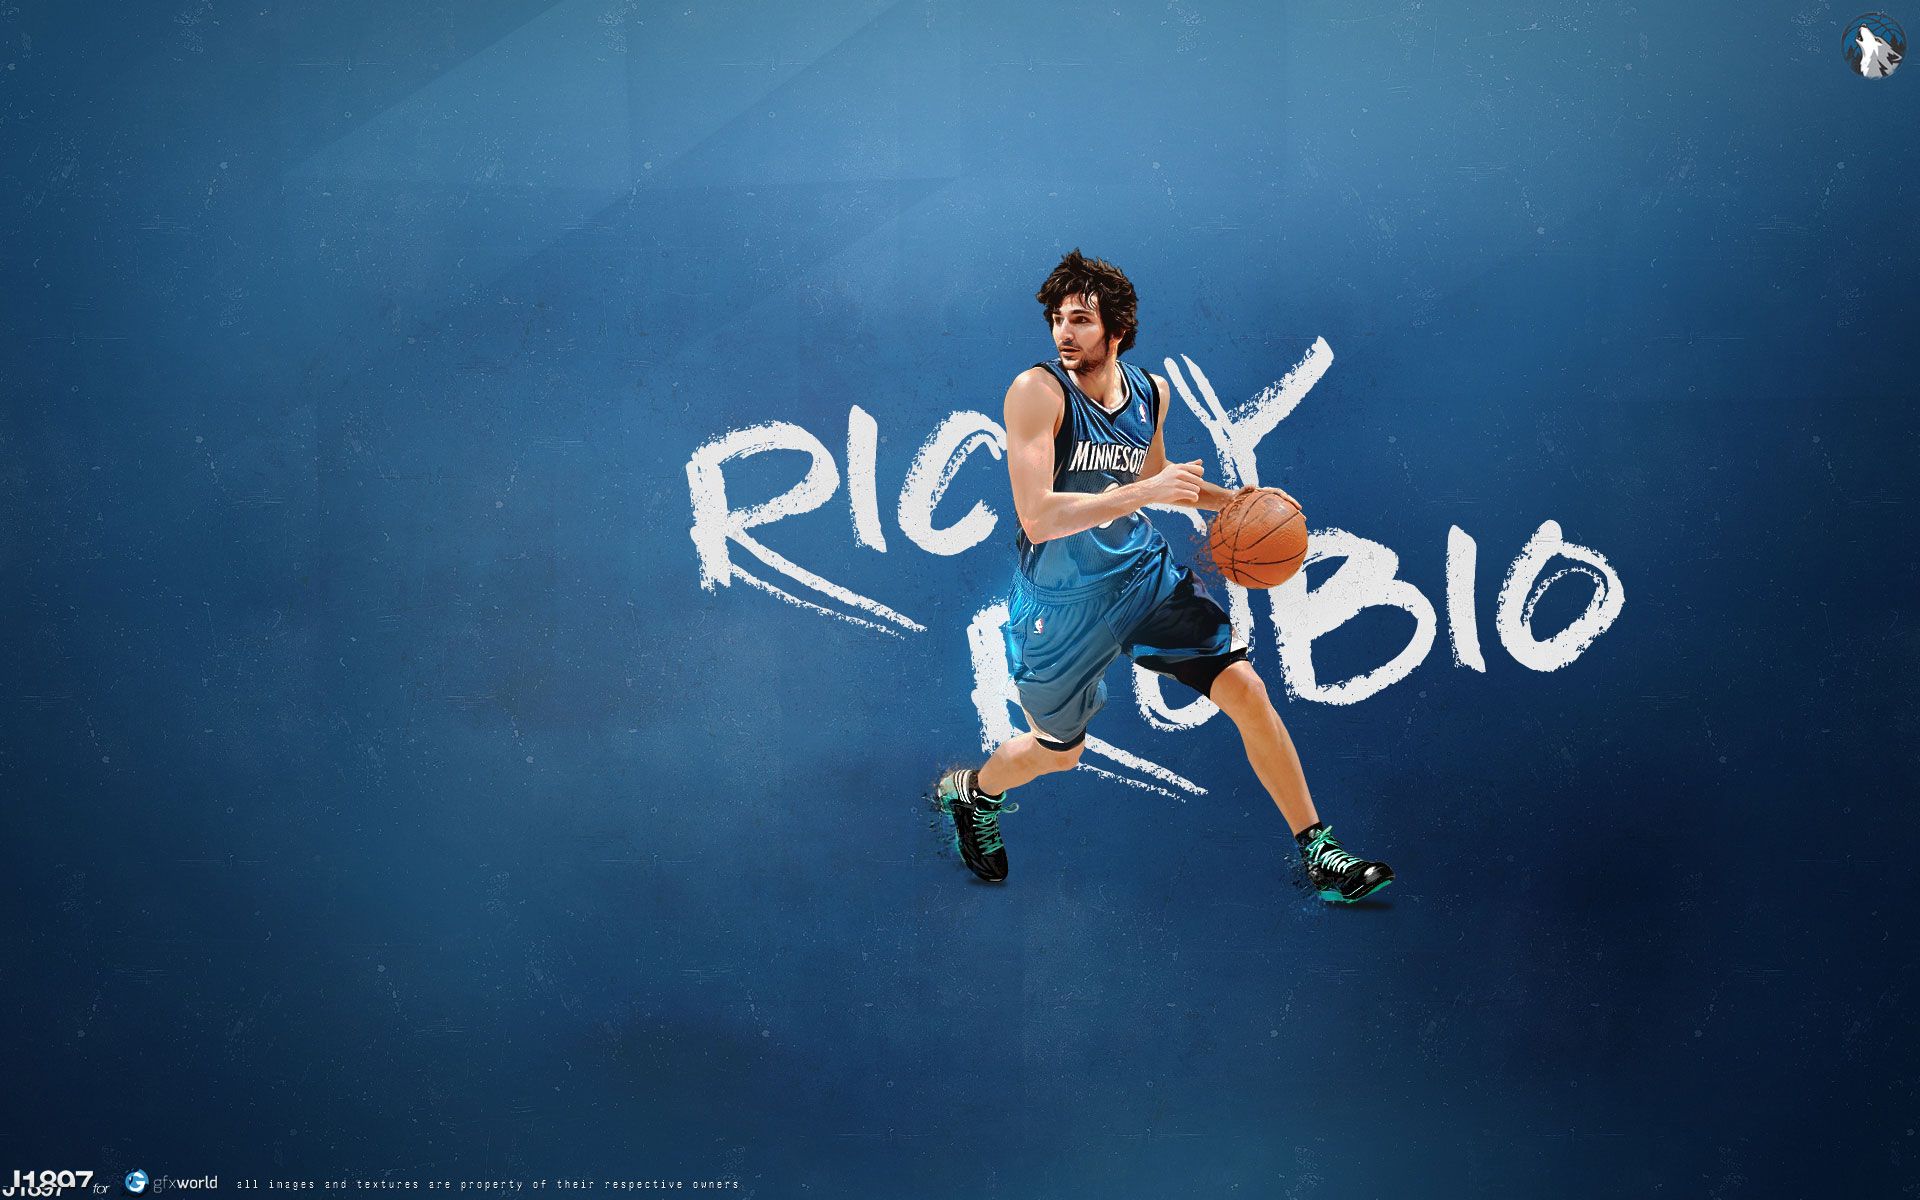 Ricky Rubio Wallpapers | Basketball Wallpapers at BasketWallpapers.com